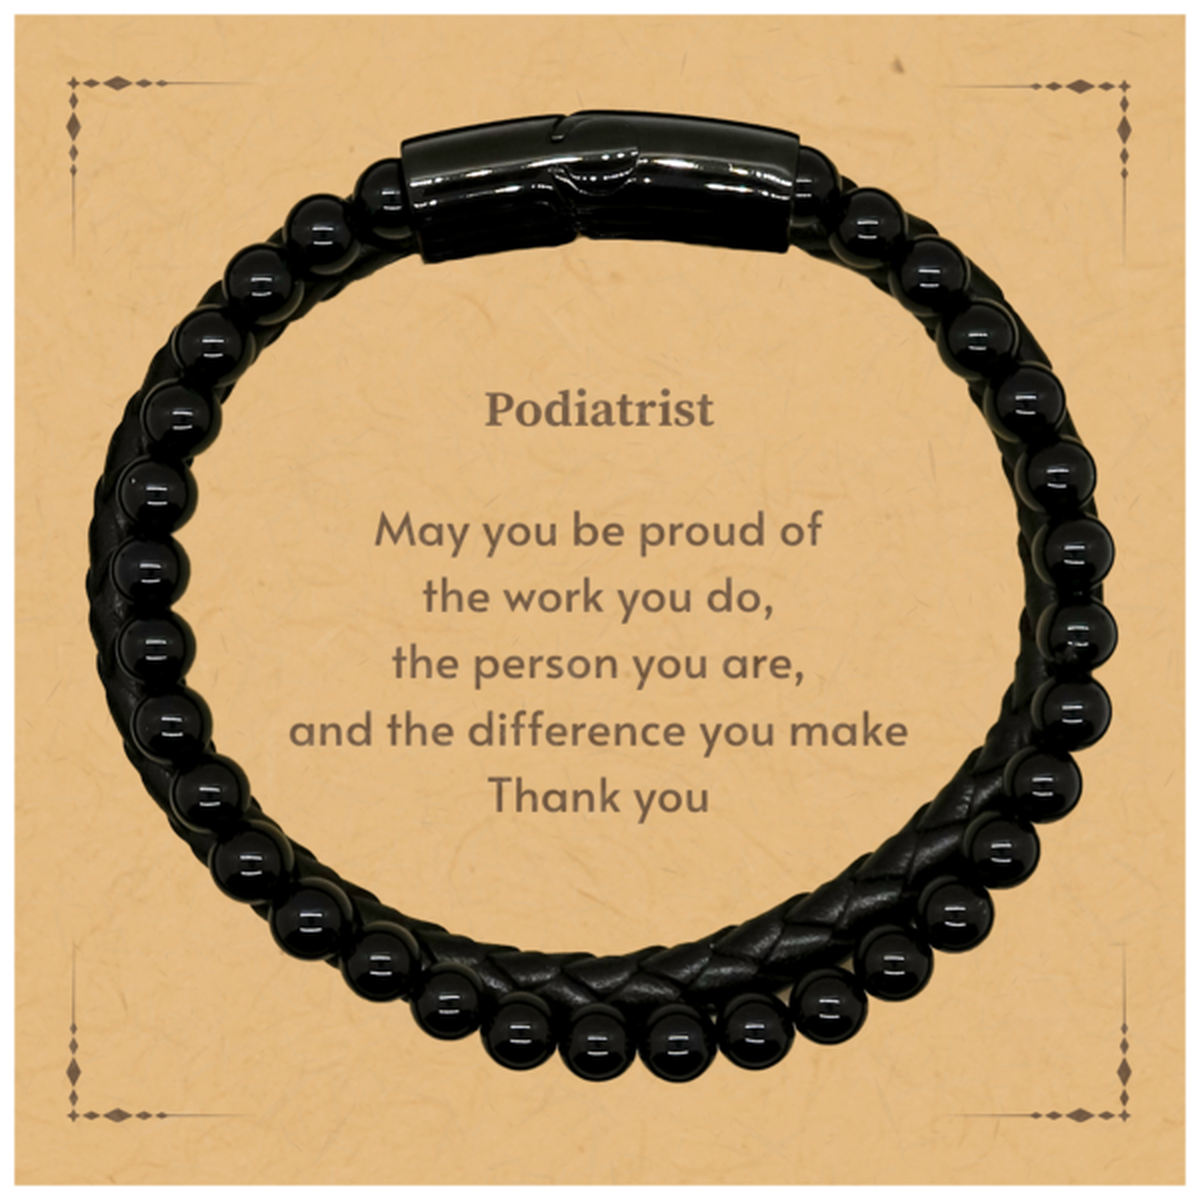 Heartwarming Stone Leather Bracelets Retirement Coworkers Gifts for Podiatrist, Podiatrist May You be proud of the work you do, the person you are Gifts for Boss Men Women Friends